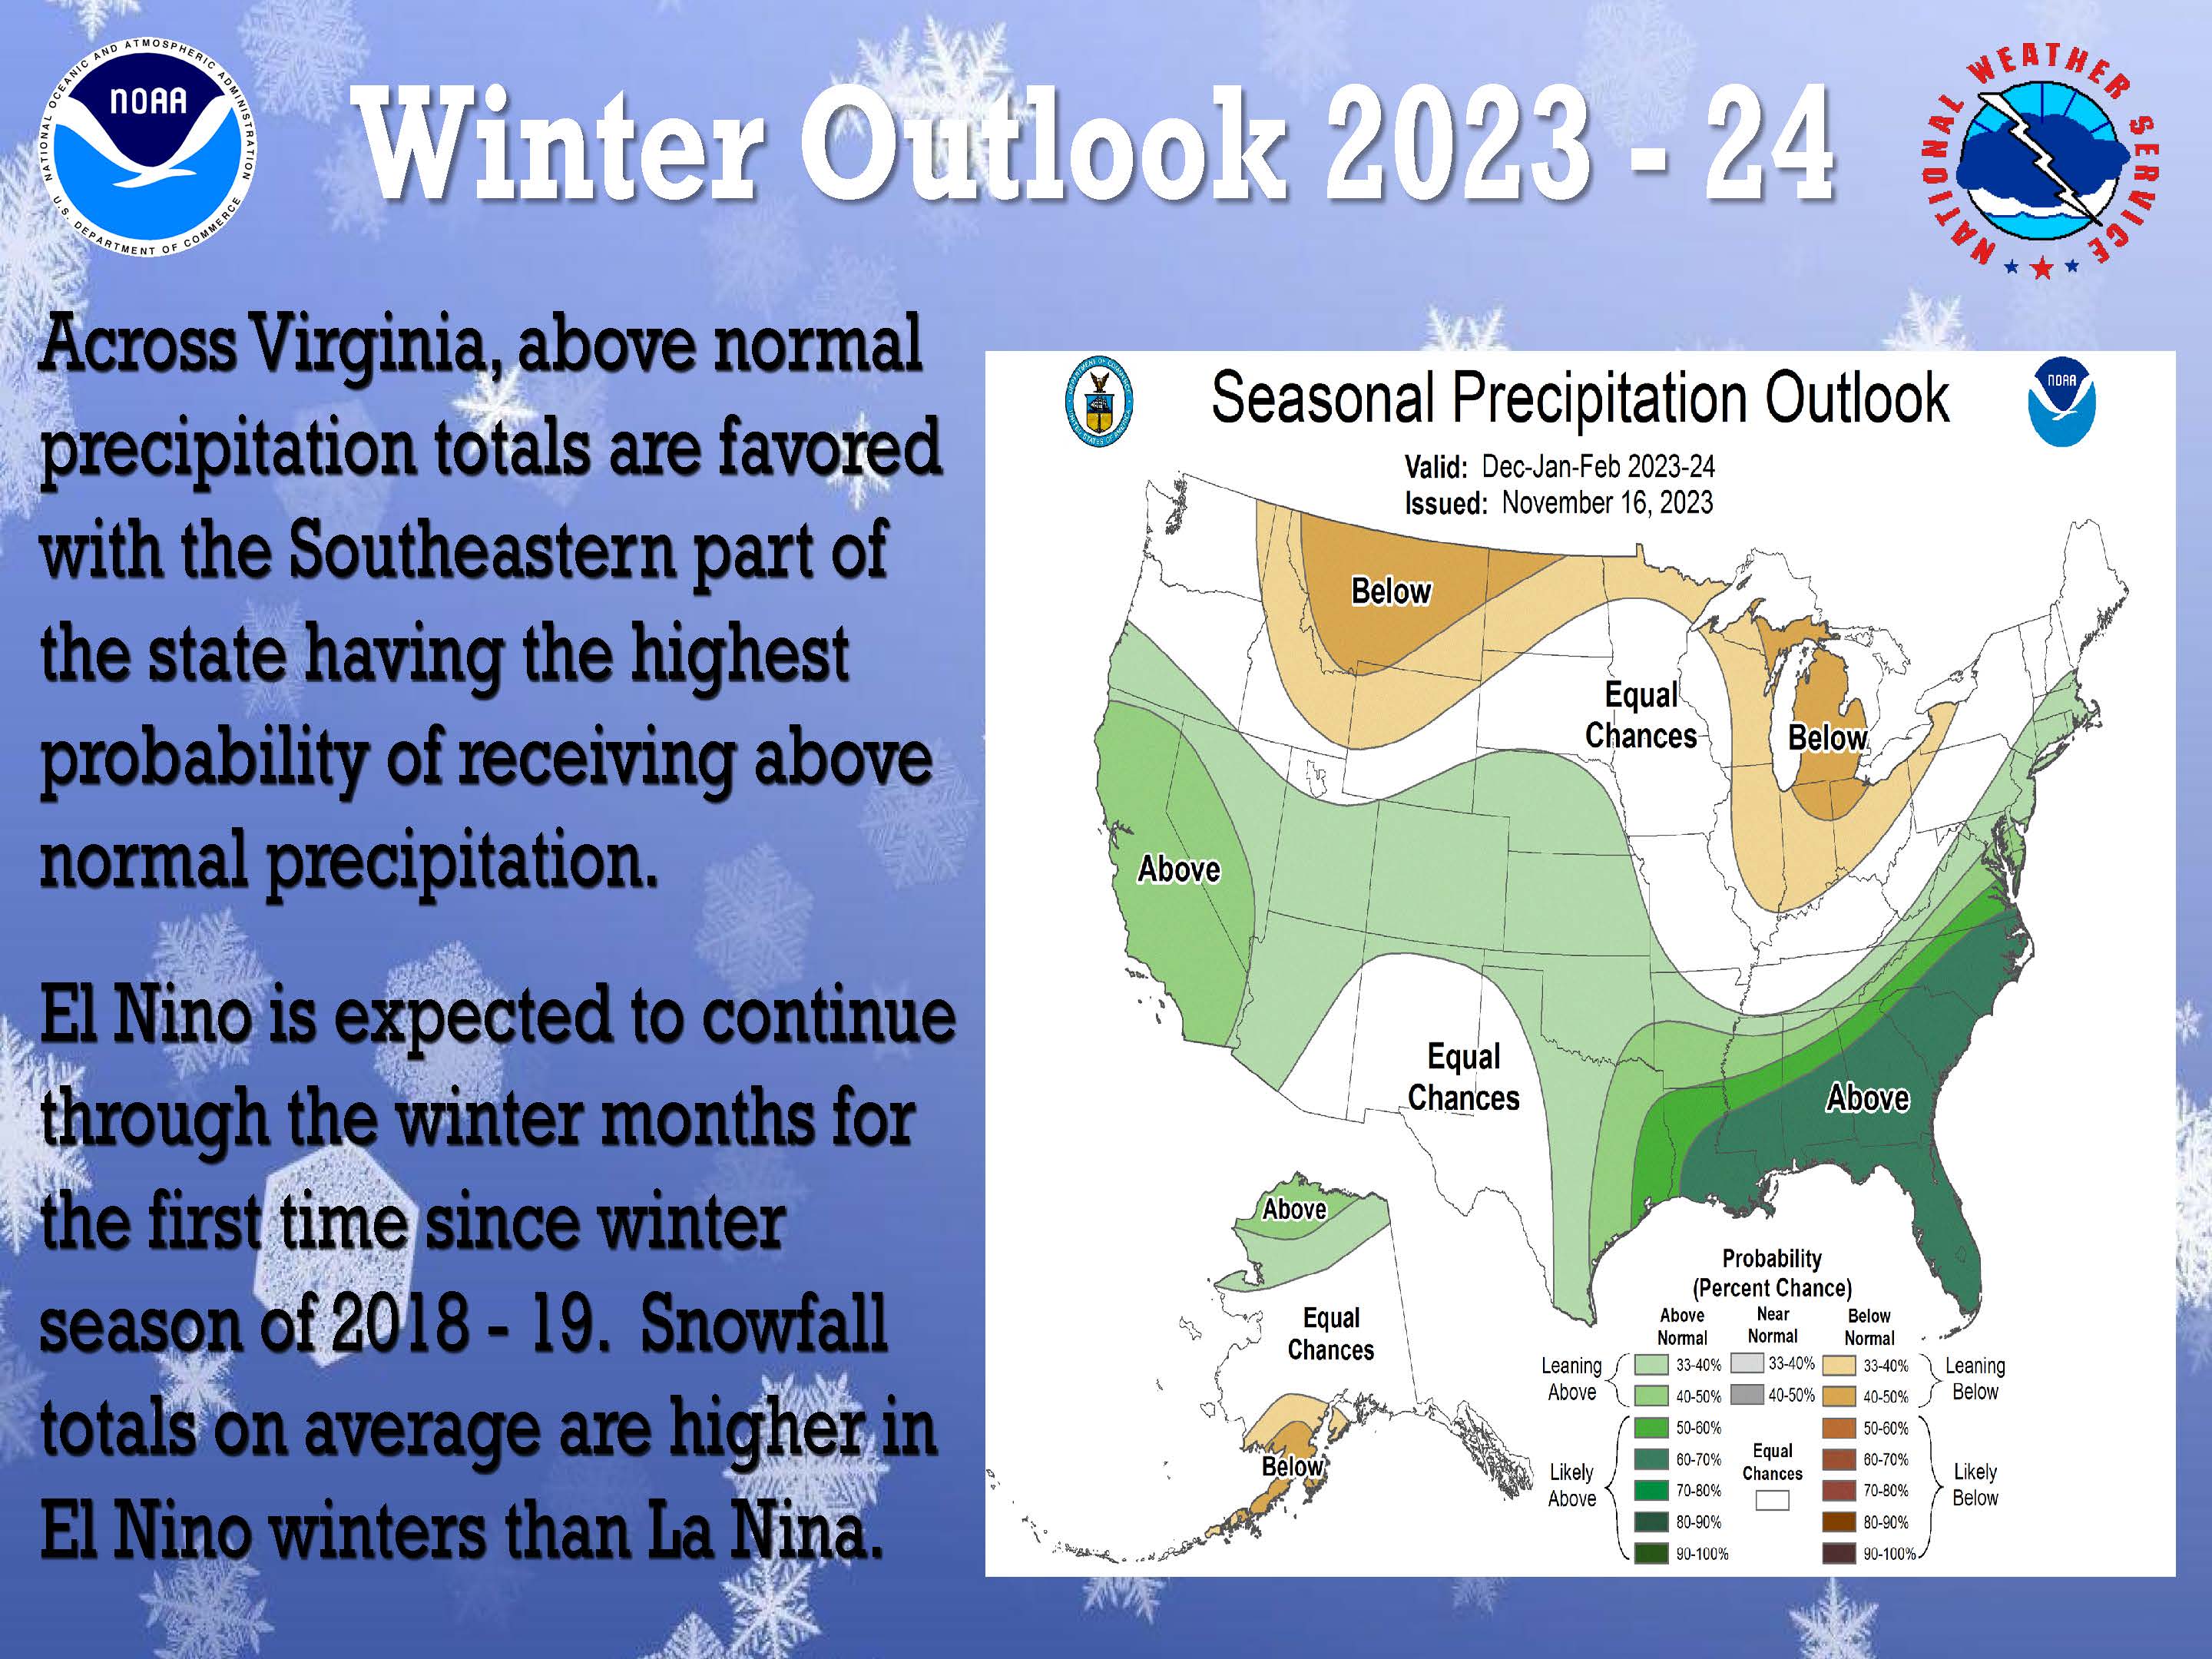 Winter Outlook: No Major Blizzards, But Above Normal Snowfall Is Possible  This Winter across the DMV